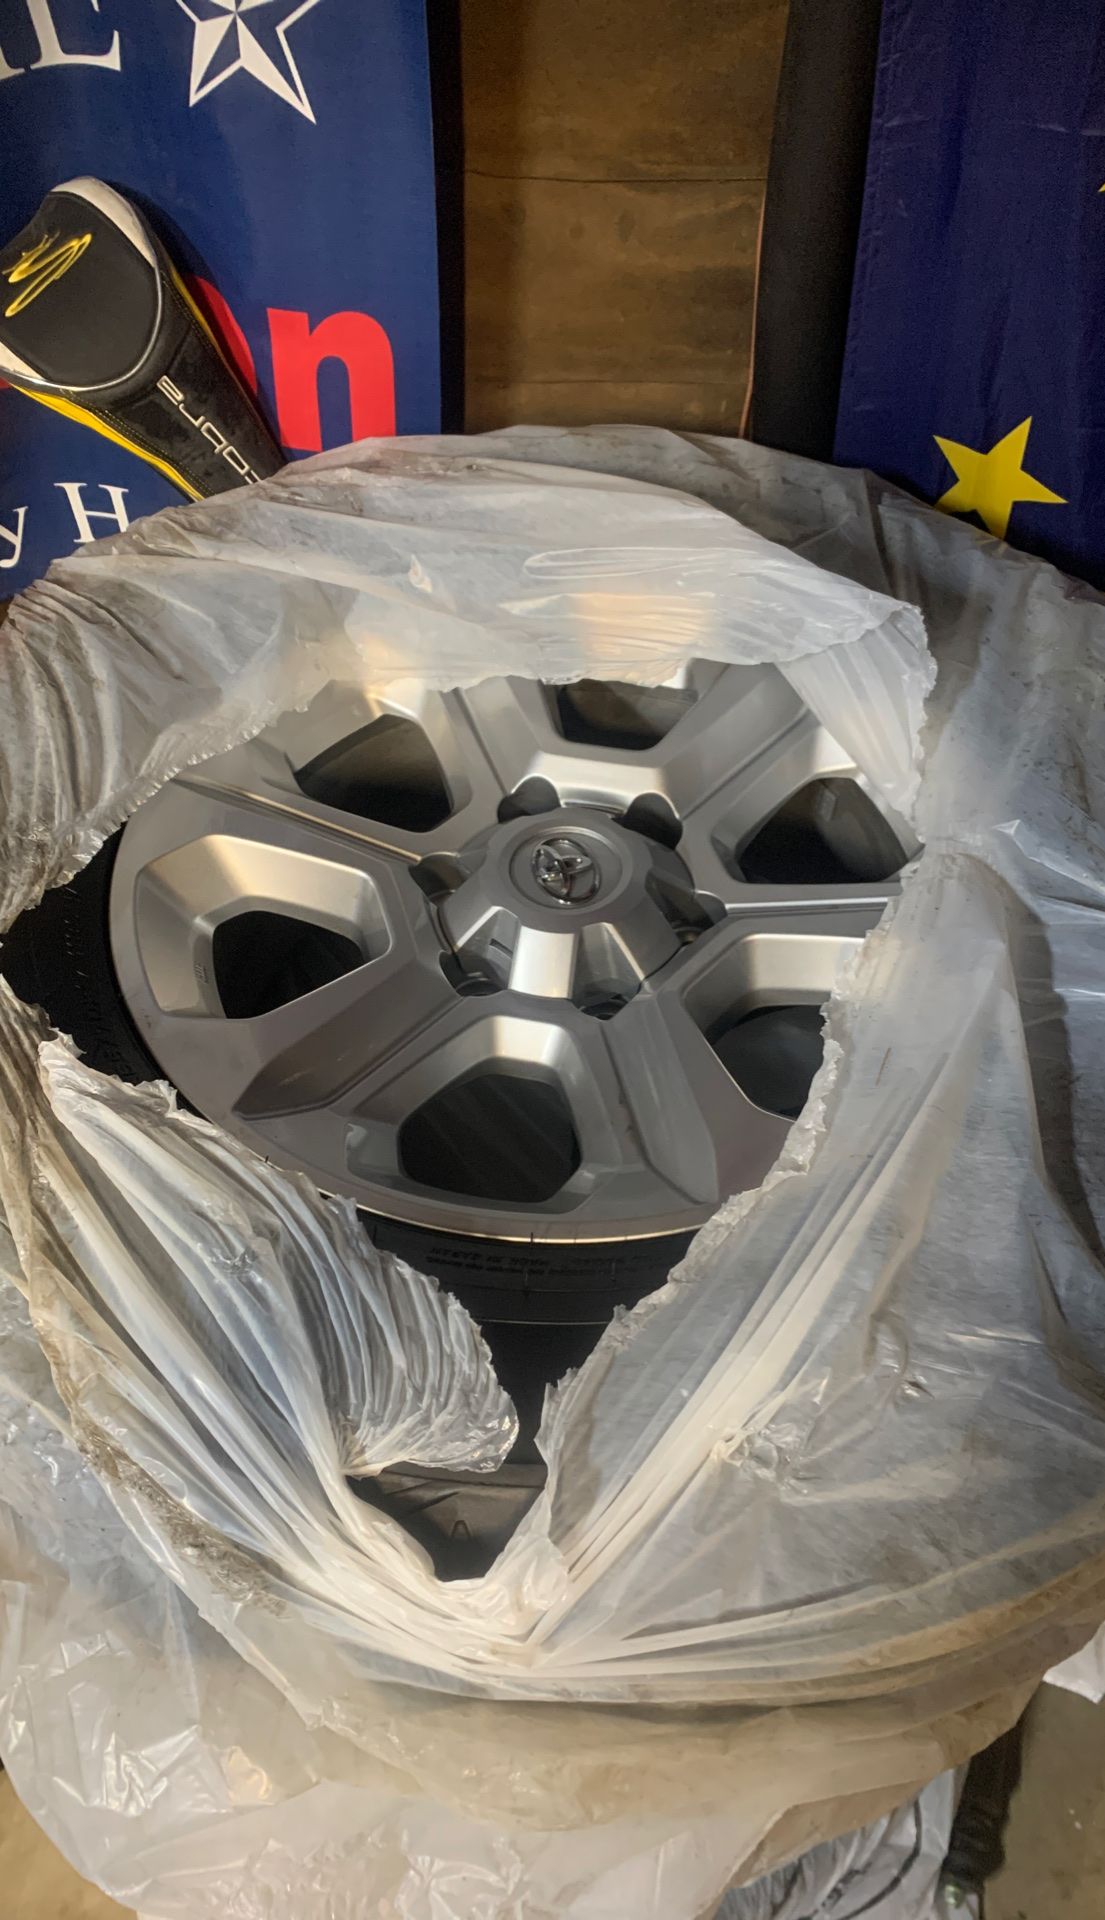 2019 4Runner rims and tires!